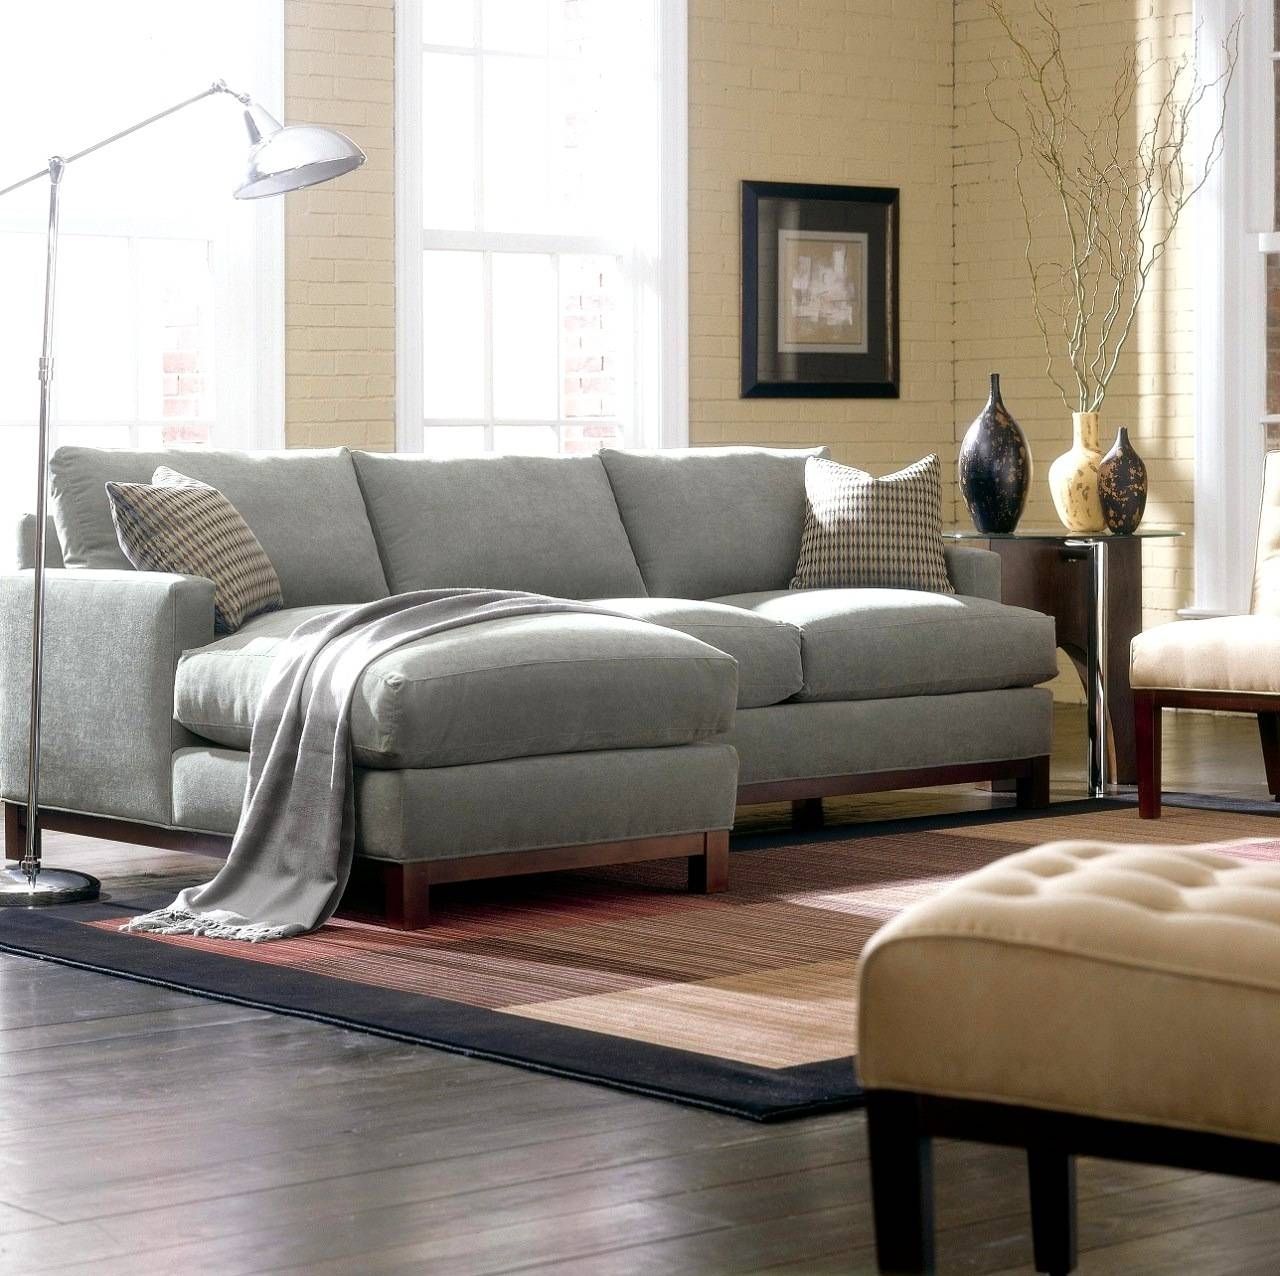 Room And Board Sectional Sofa – Cleanupflorida Regarding Room And Board Sectional Sofa (View 9 of 25)